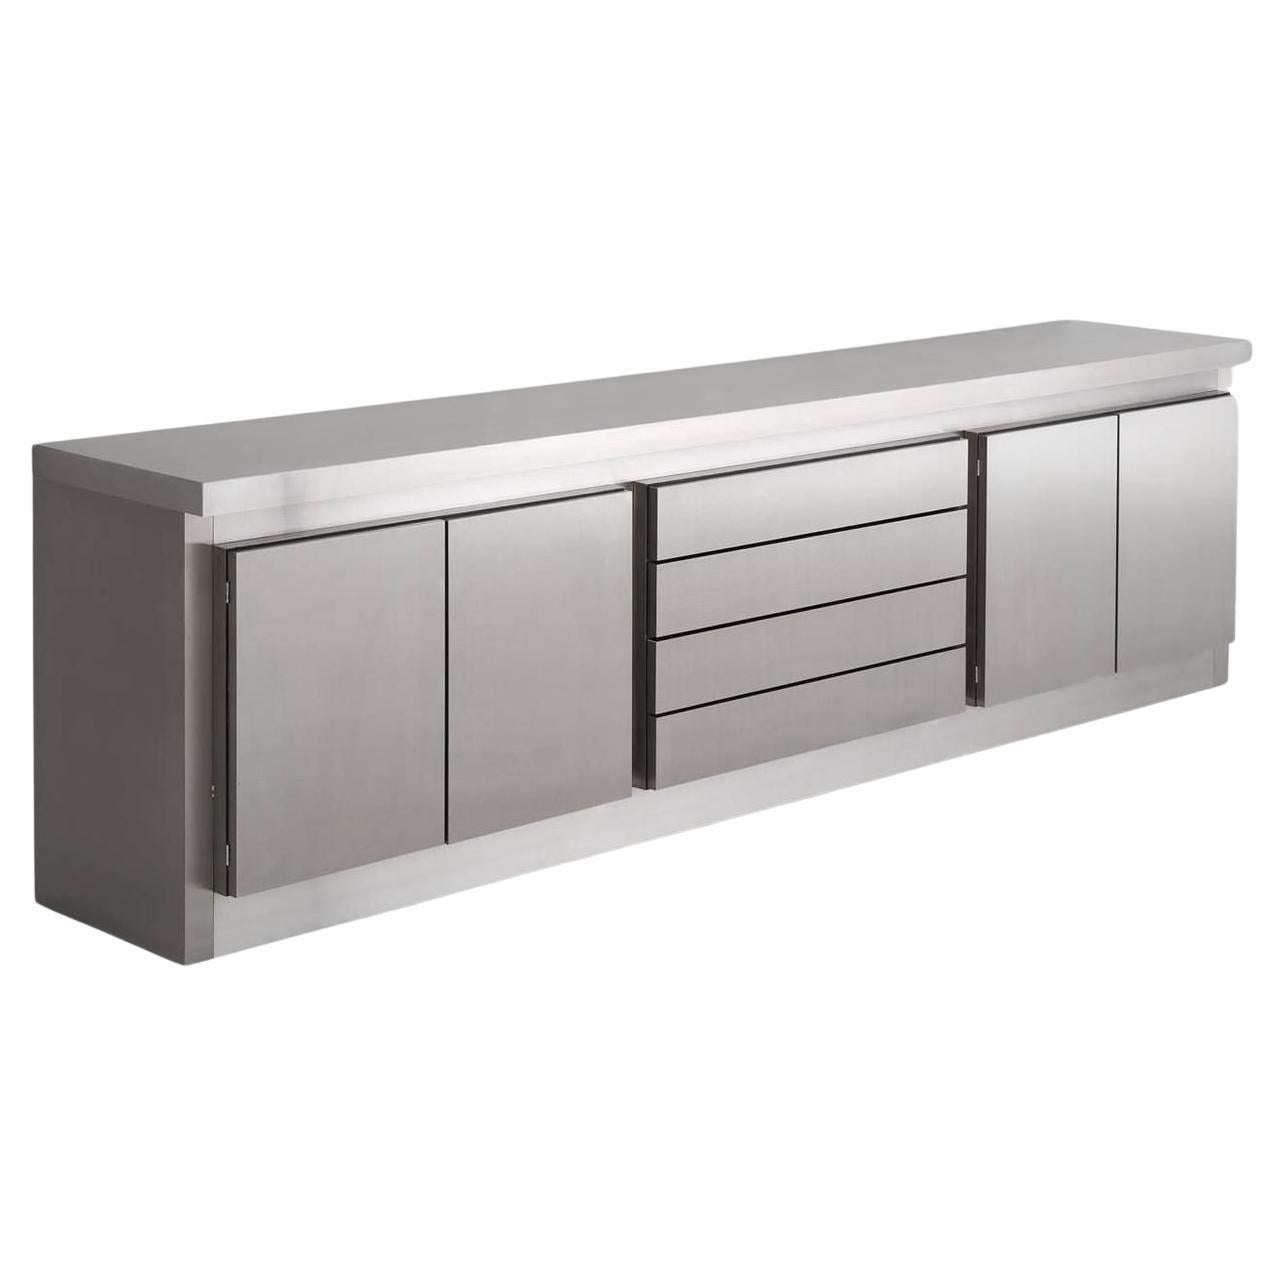 Rare Stainless Steel Sideboard by Lodovico Acerbis, Italy ca. 1970s For Sale